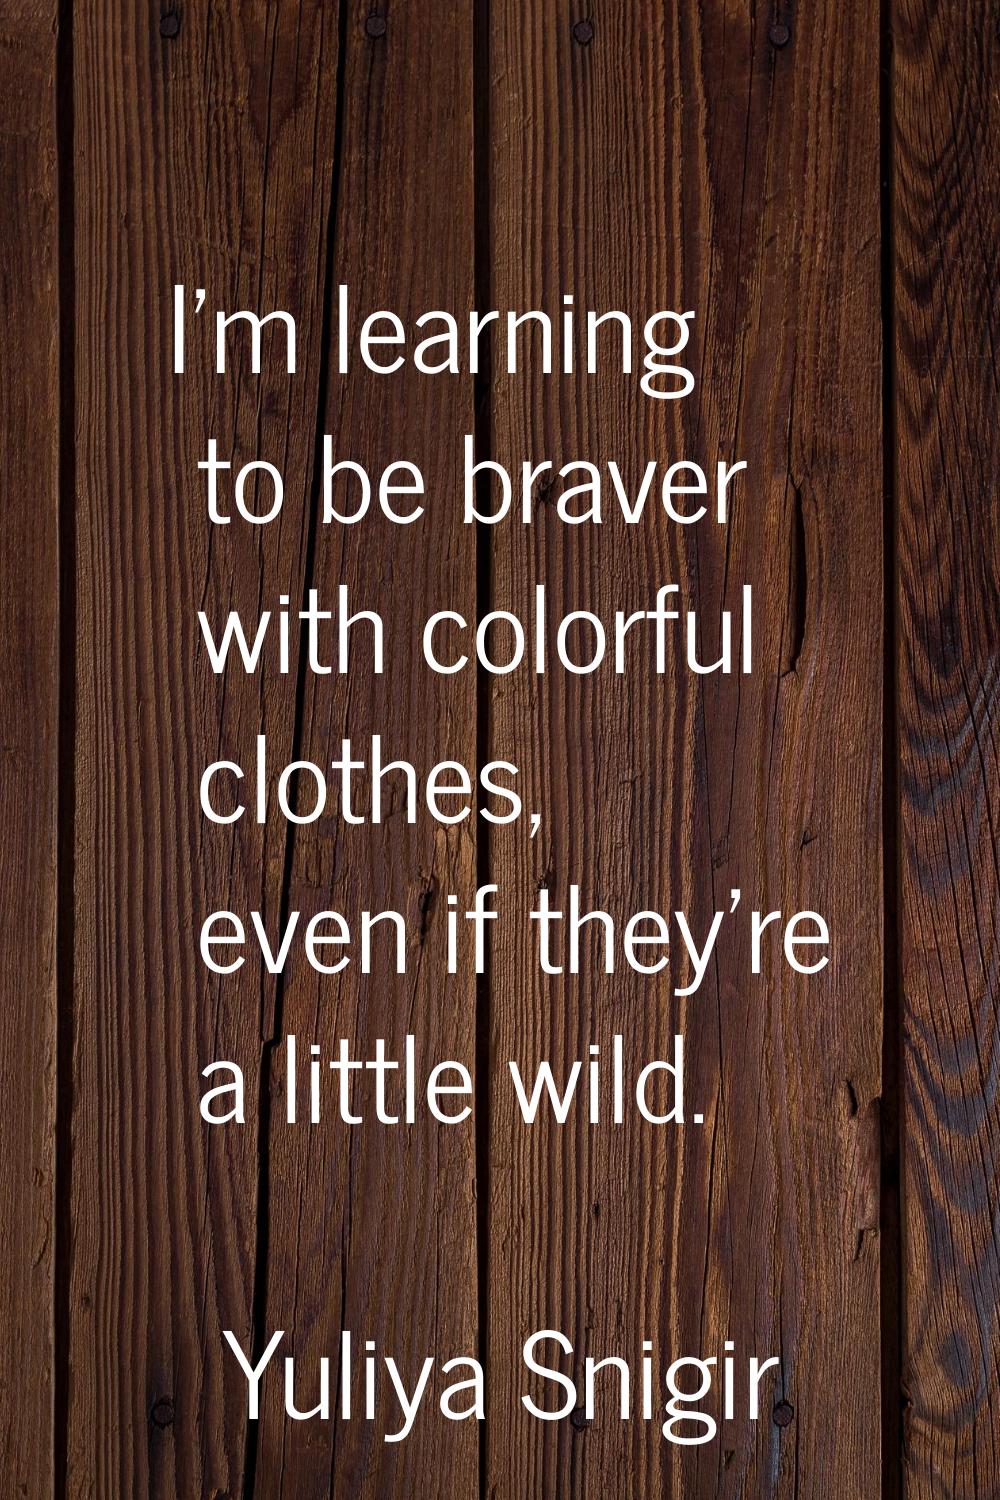 I'm learning to be braver with colorful clothes, even if they're a little wild.